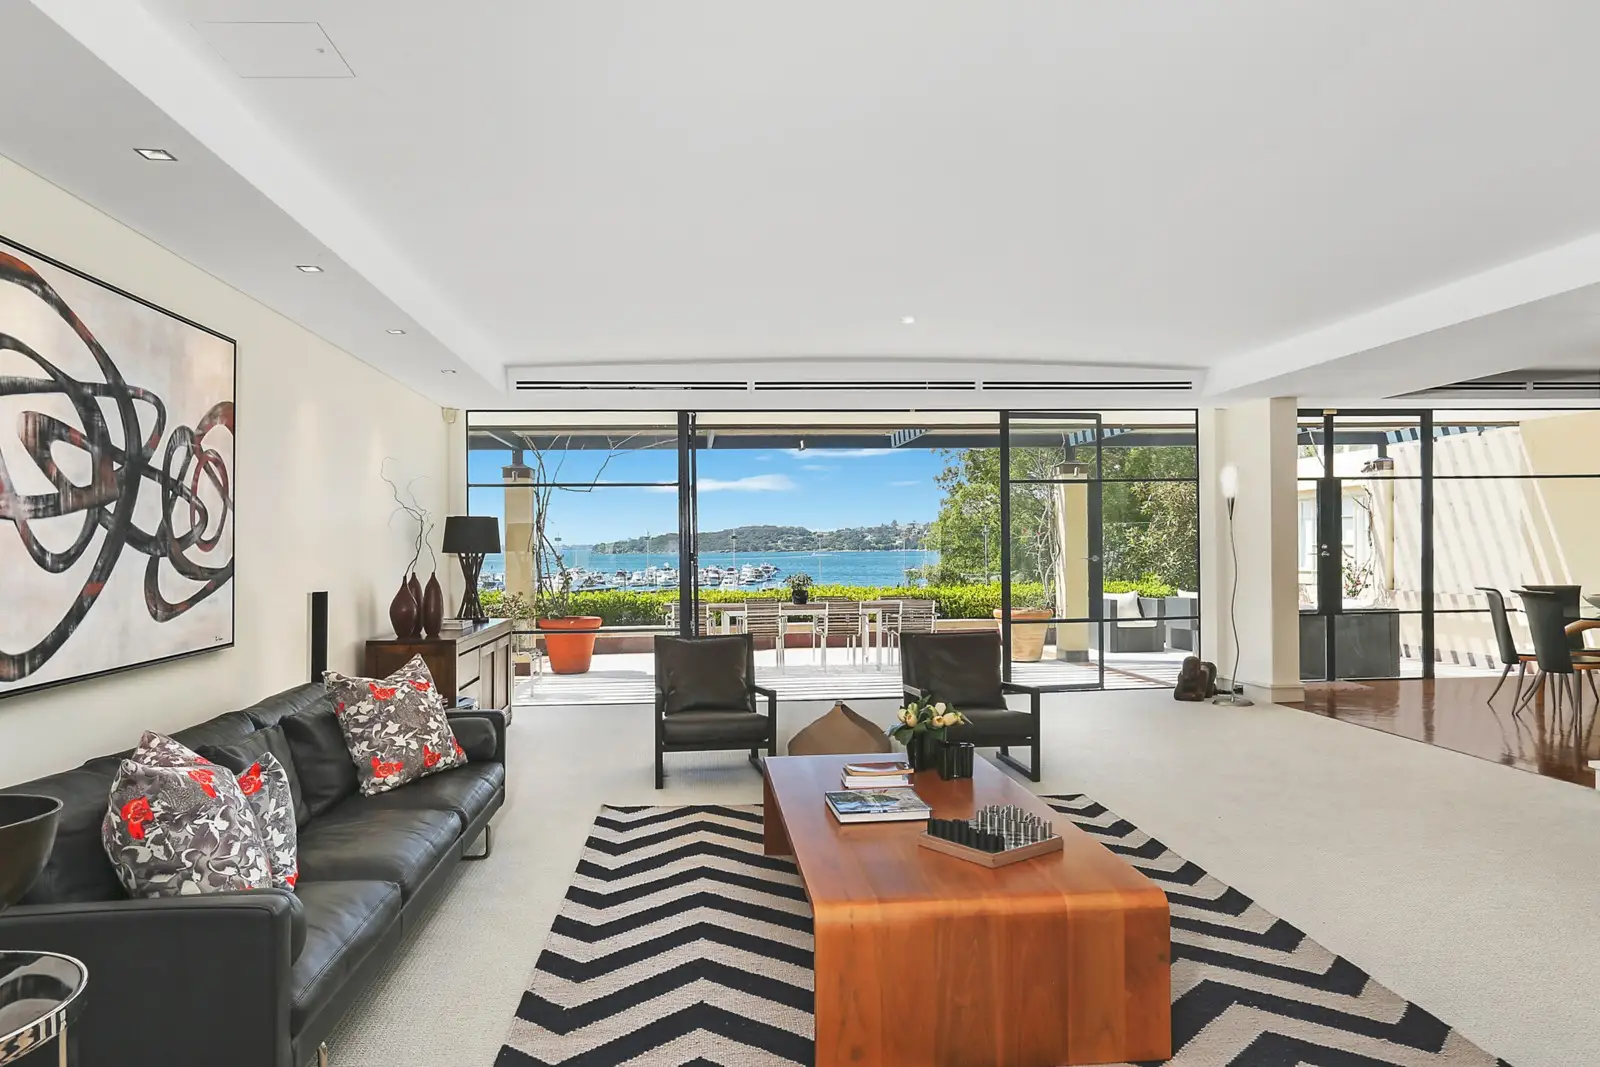 Photo #2: 3/589 New South Head Road, Rose Bay - Sold by Sydney Sotheby's International Realty